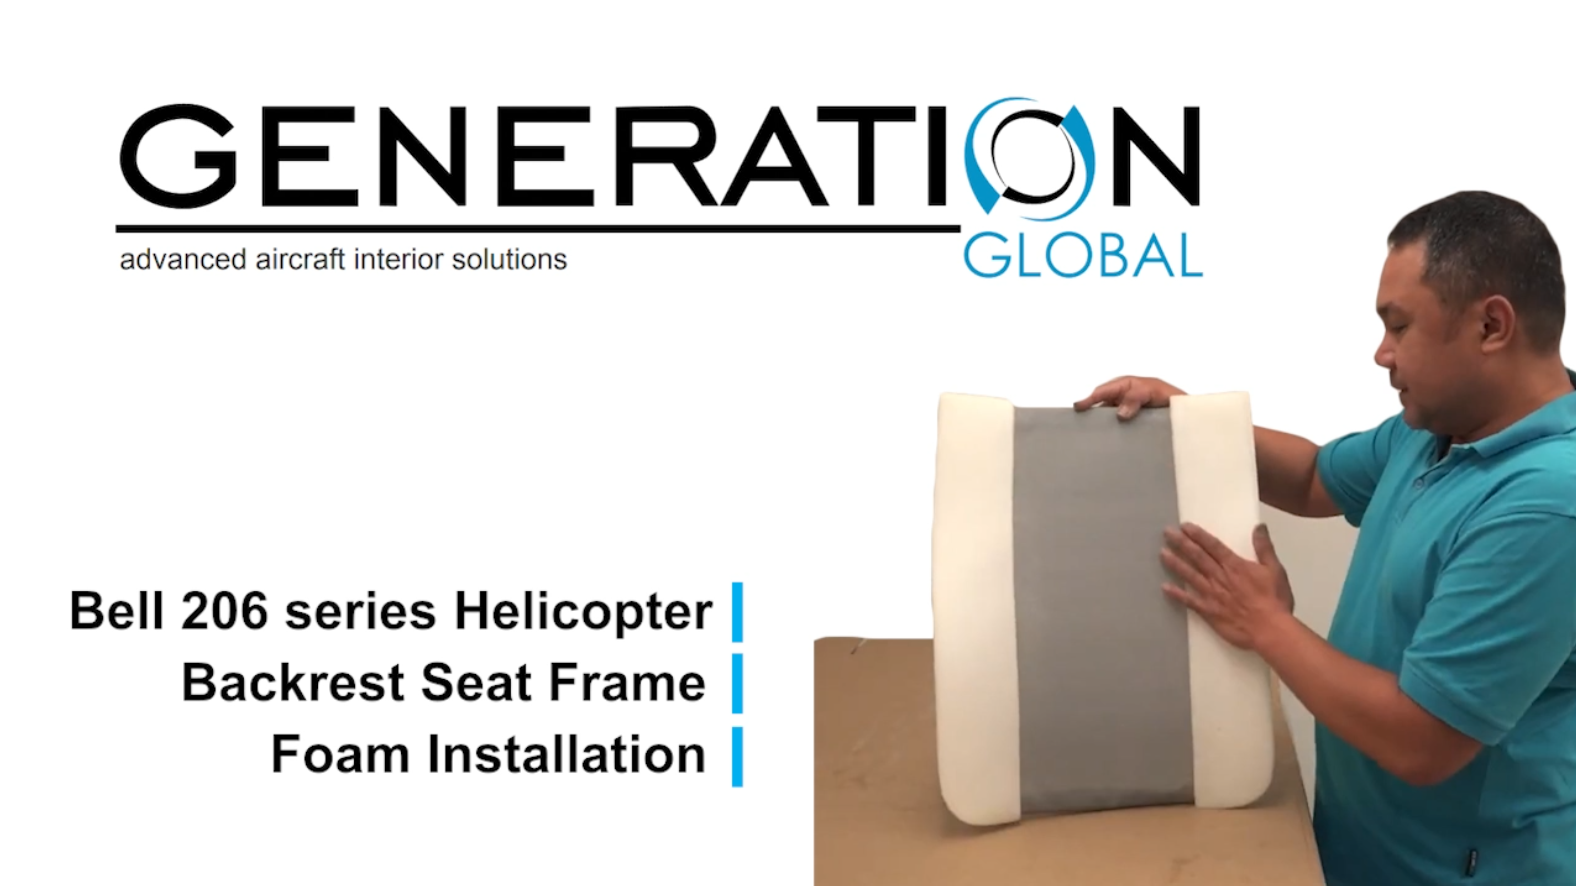 Bell 206 series Helicopter, Pax Seat backrest, Foam Installation